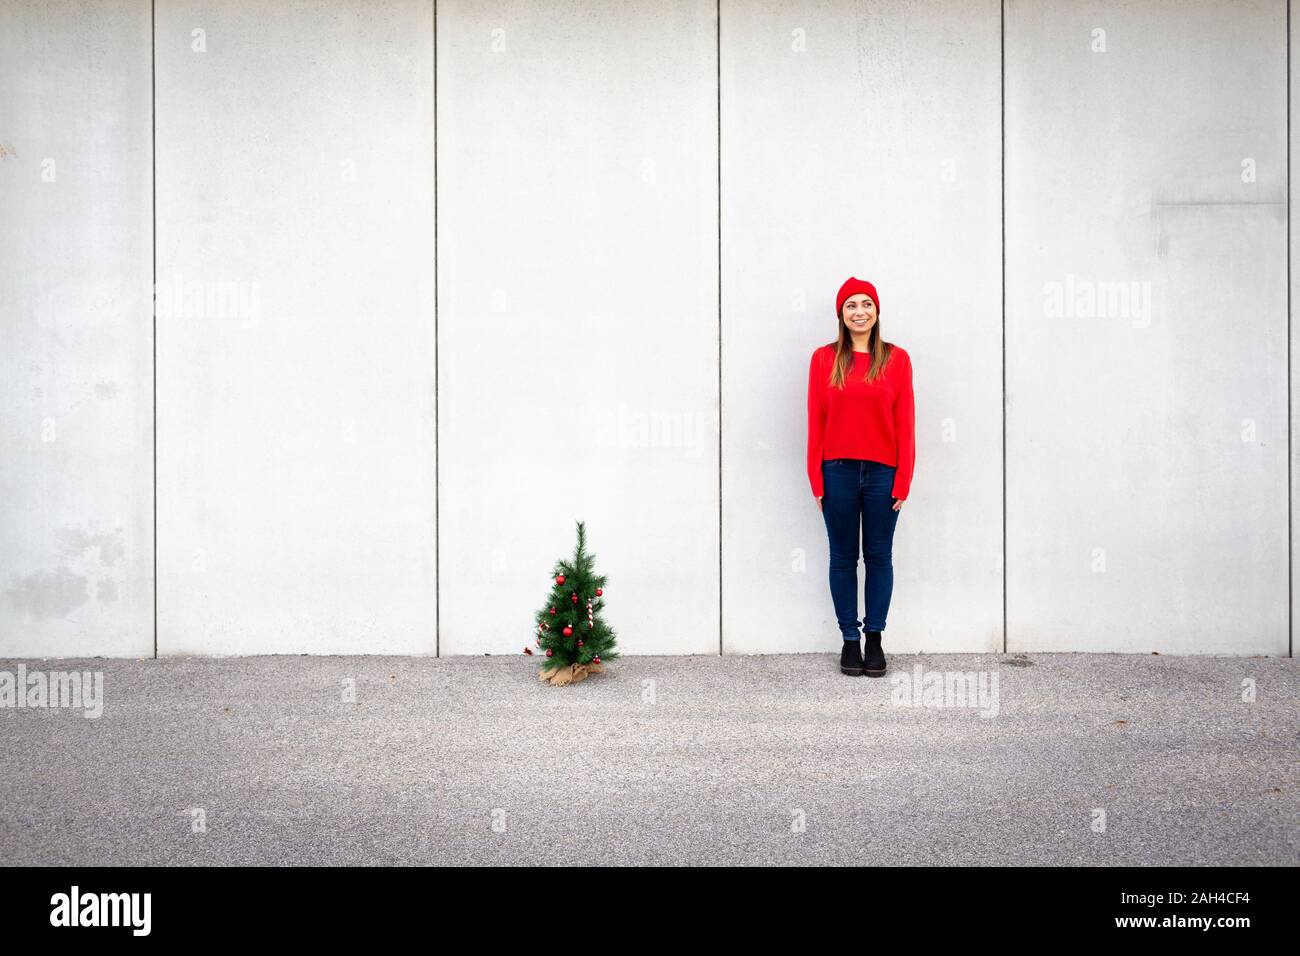 Woman wearing red pullover and wolly hat, holding artificial Christmas tree in front of a wall Stock Photo